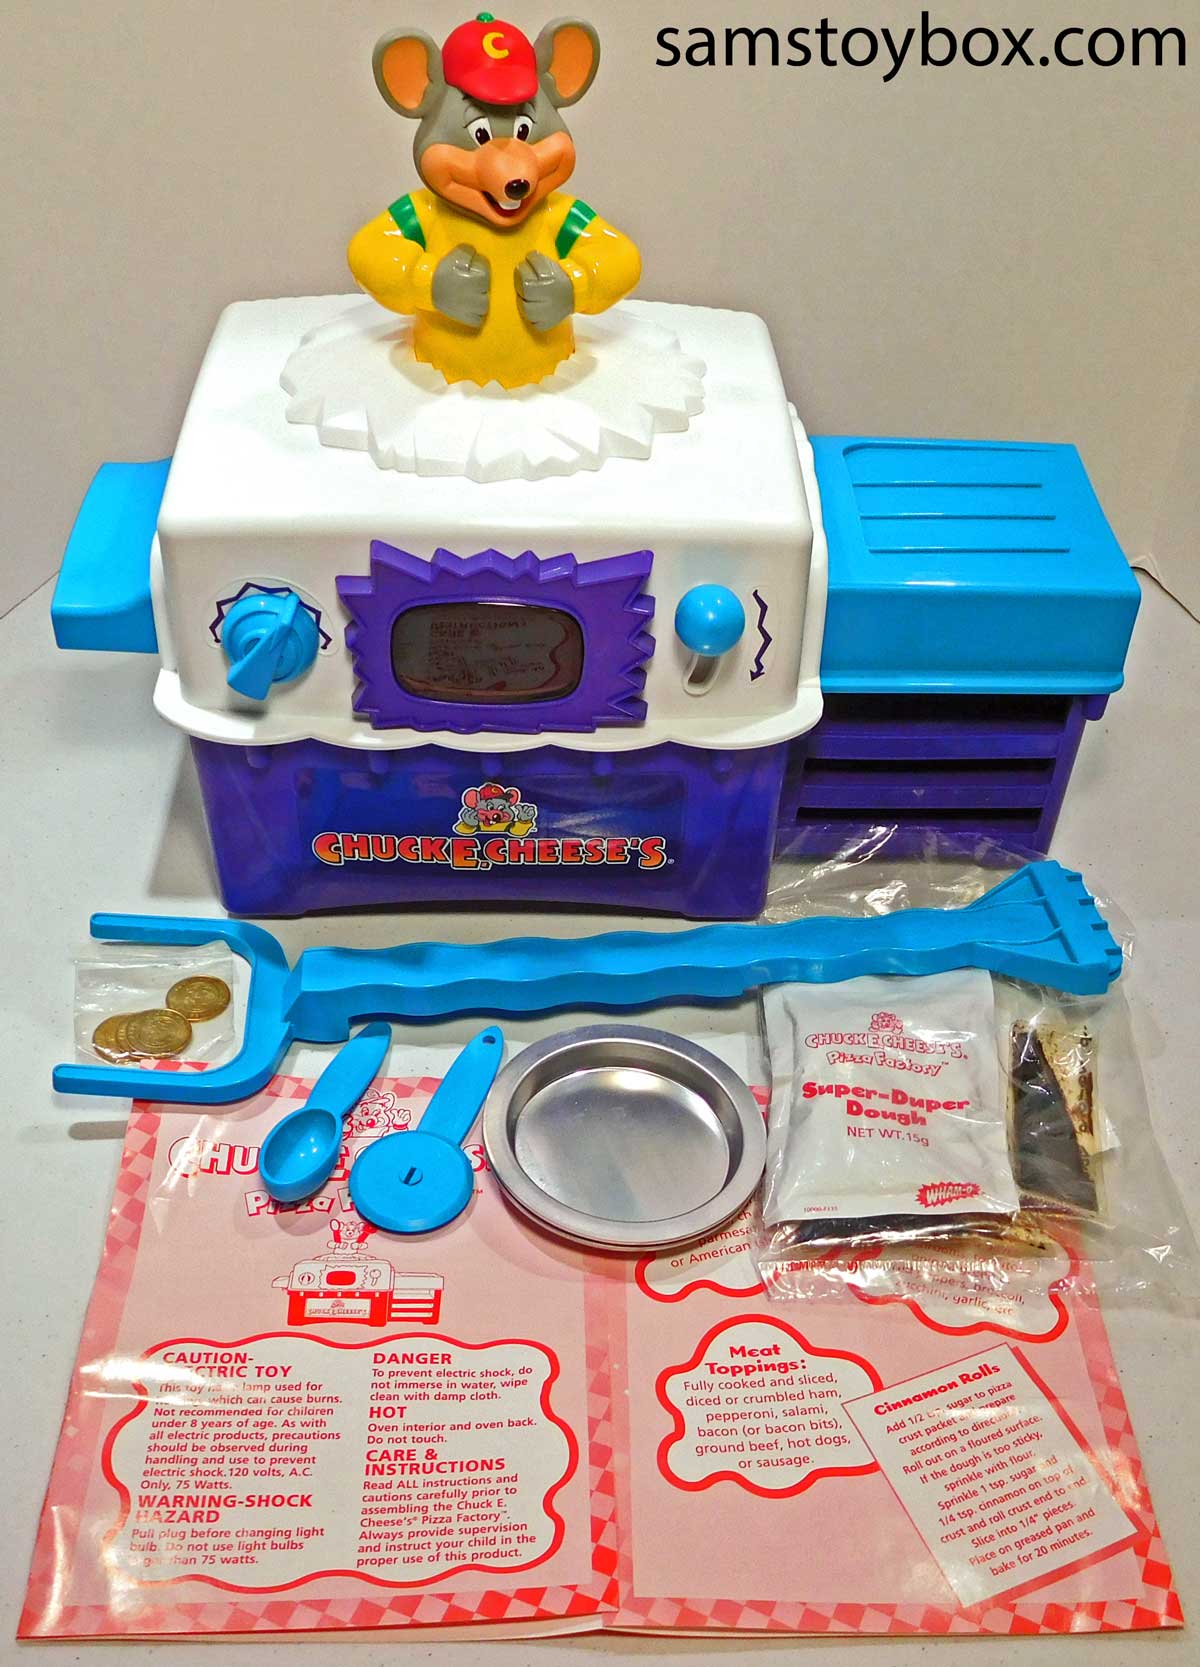 Contents of the Chuck E. Cheese's Pizza Factory.